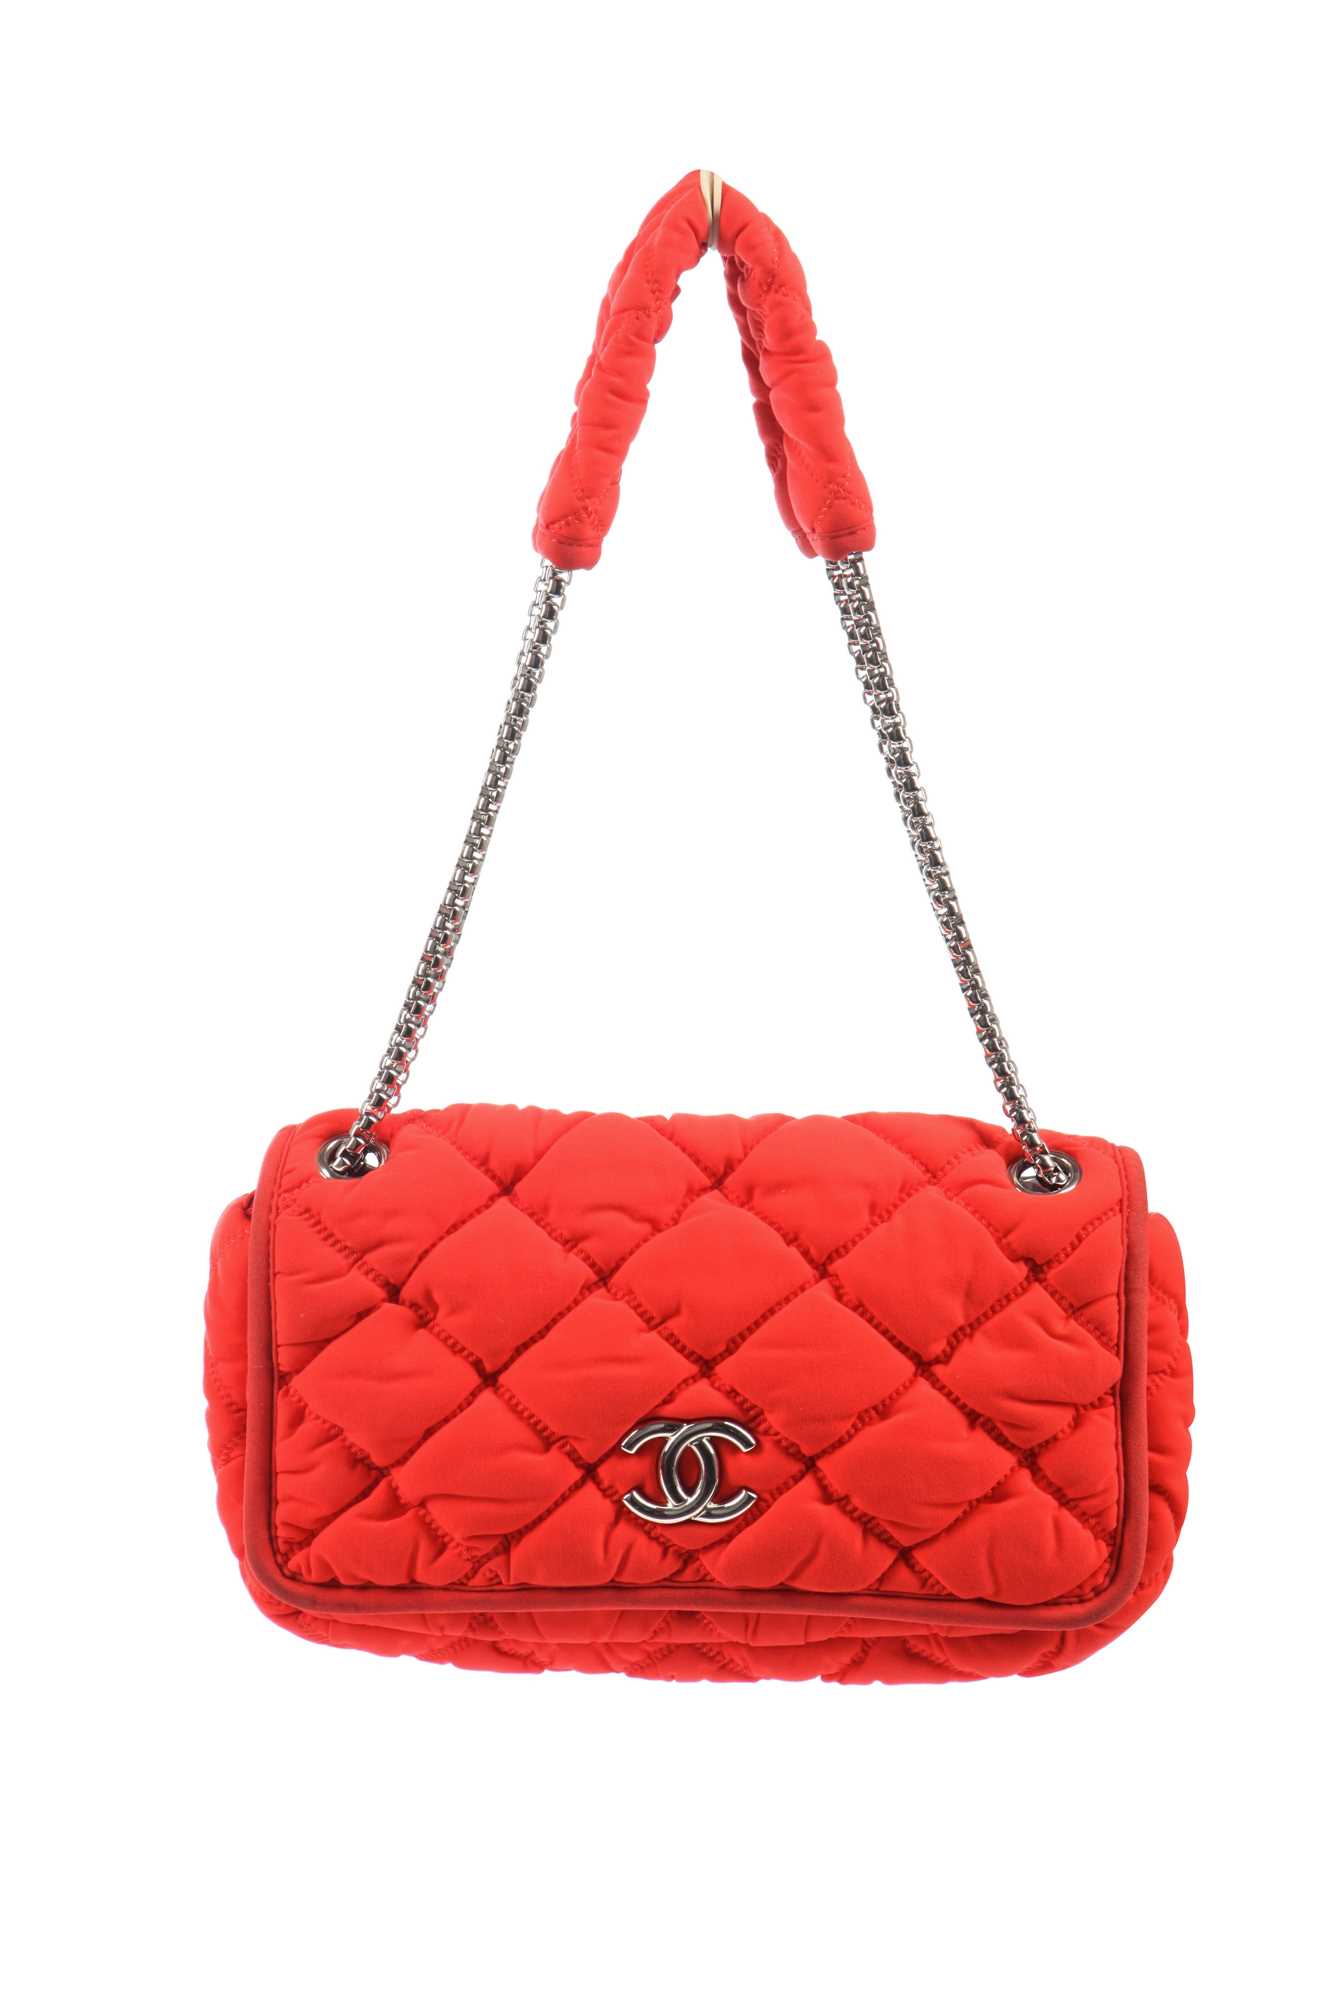 Lot 2 - A Chanel neon-orange jersey puffer-quilted